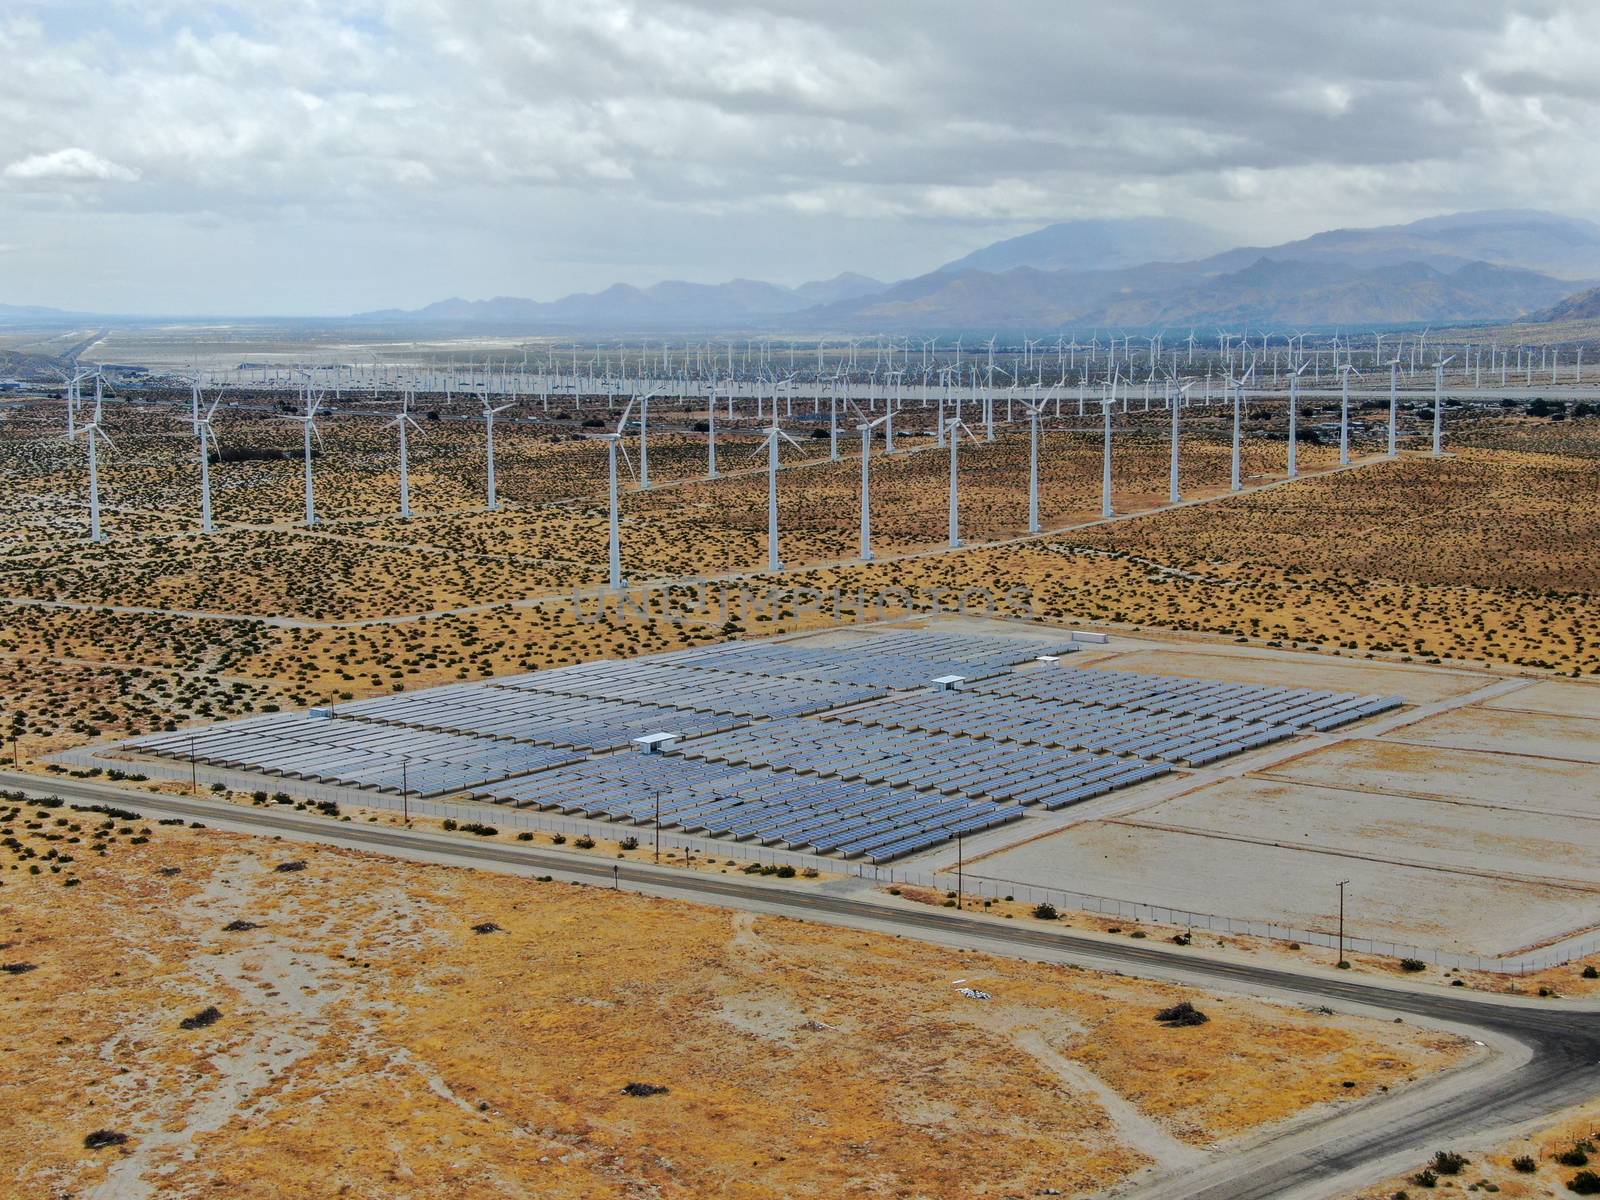 Aerial view of Genuine Energy Farm in the Hot Arid Desert of Palm Springs, California. Solar Panels farm to Harness the Power of Nature to generate free green energy.